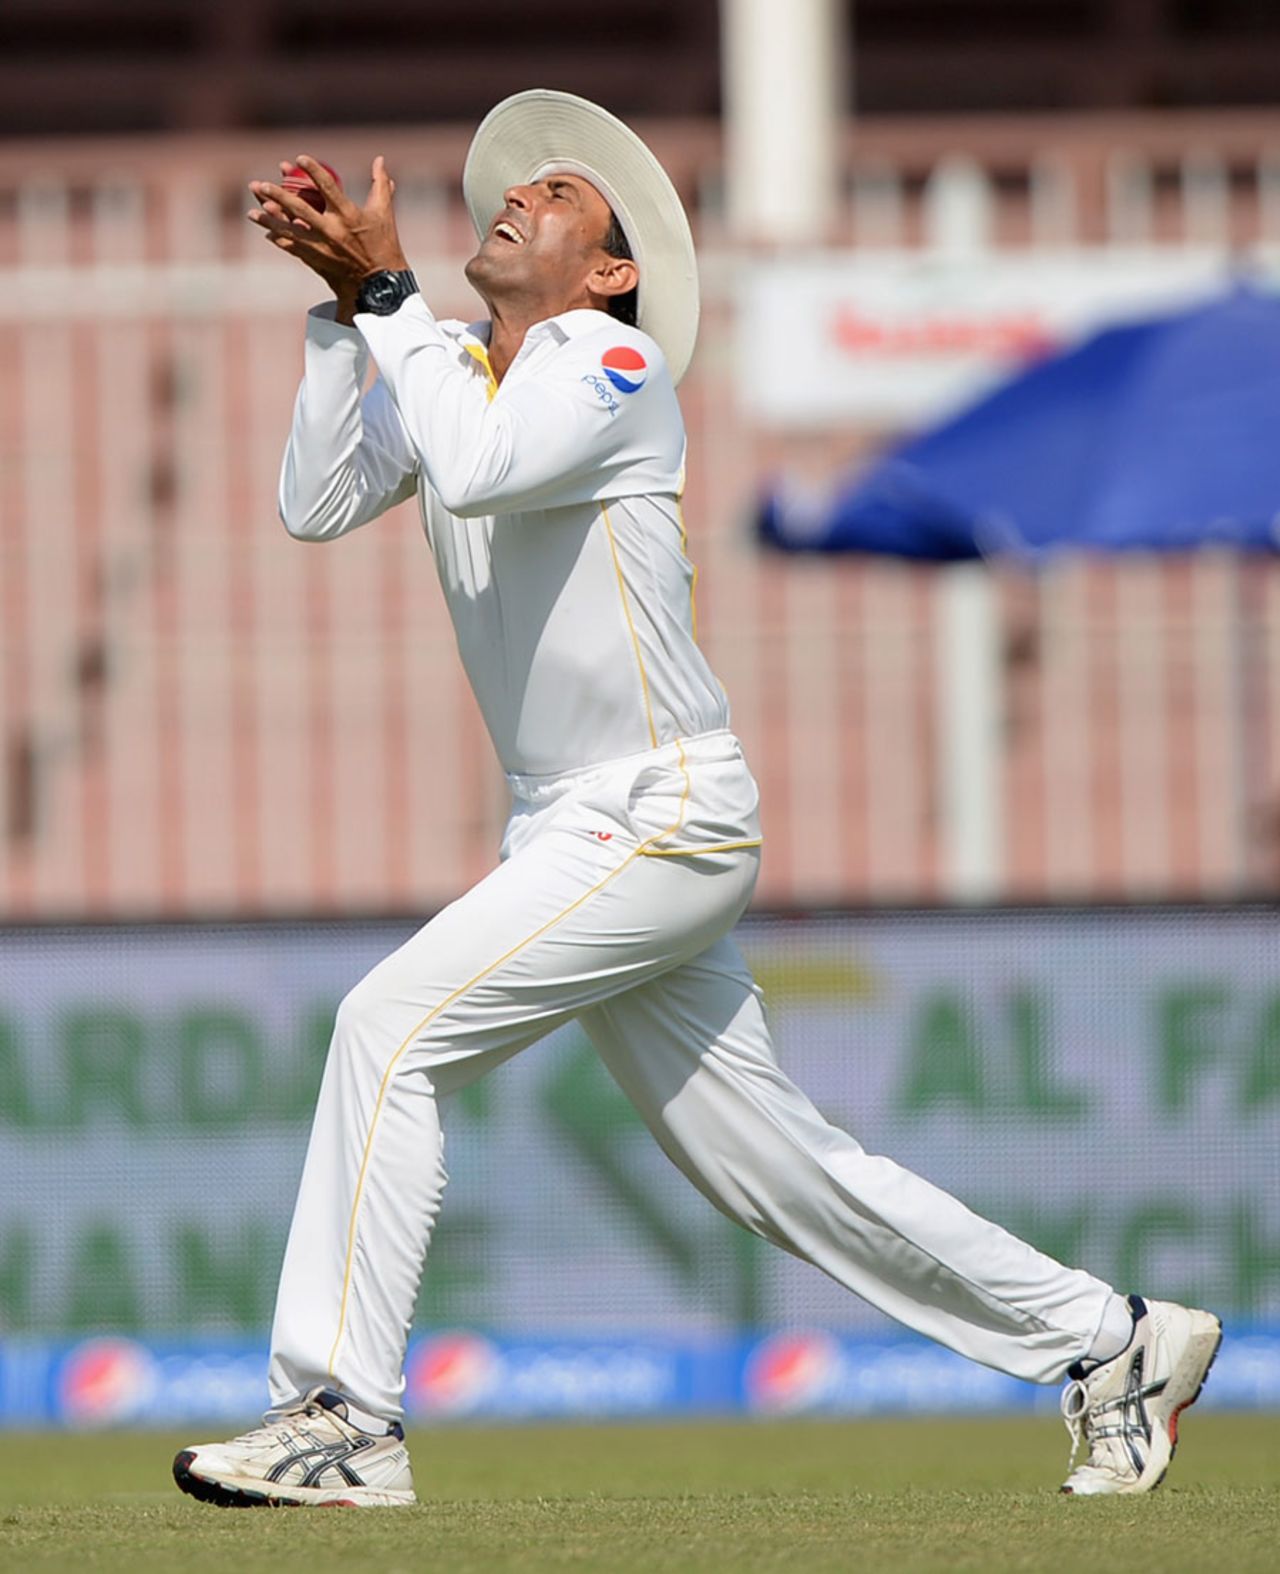 Younis Khan took a simple catch to dismiss Moeen Ali, Pakistan v England, 3rd Test, Sharjah, 2nd day, November 2, 2015